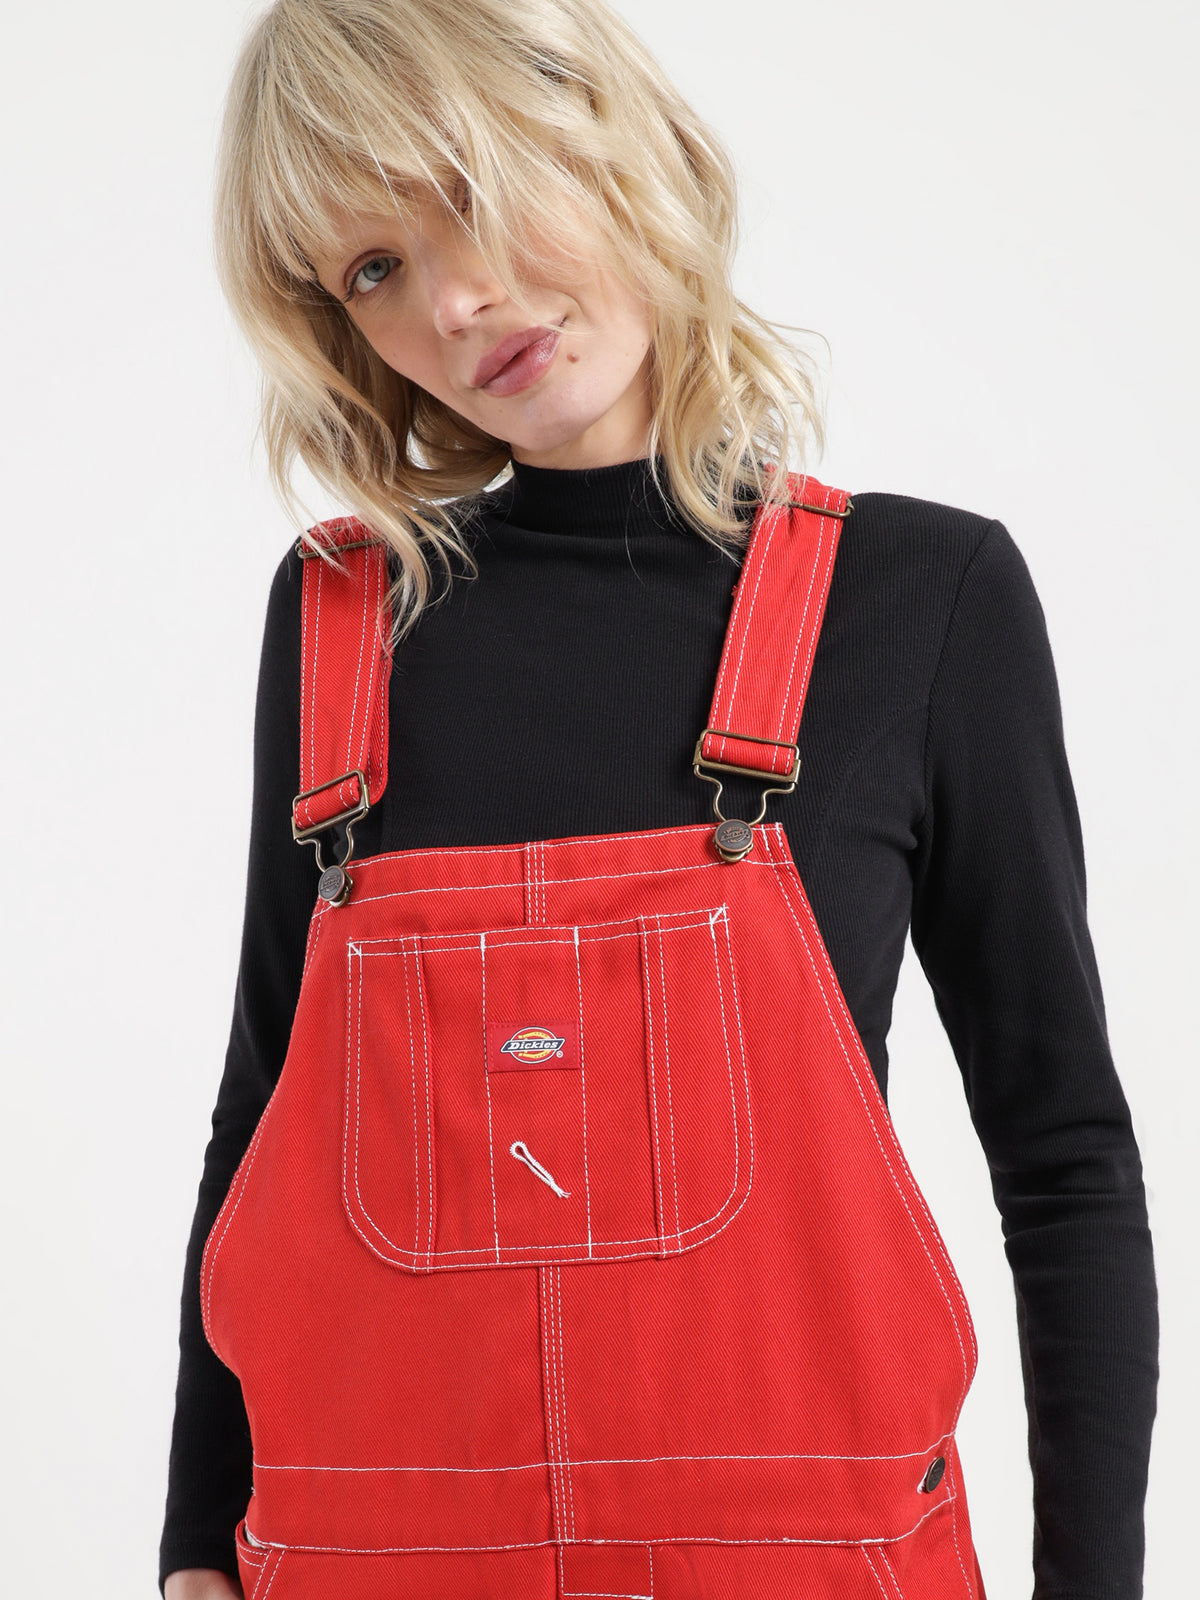 Relaxed Carpenter Jumpsuit in Cherry Red